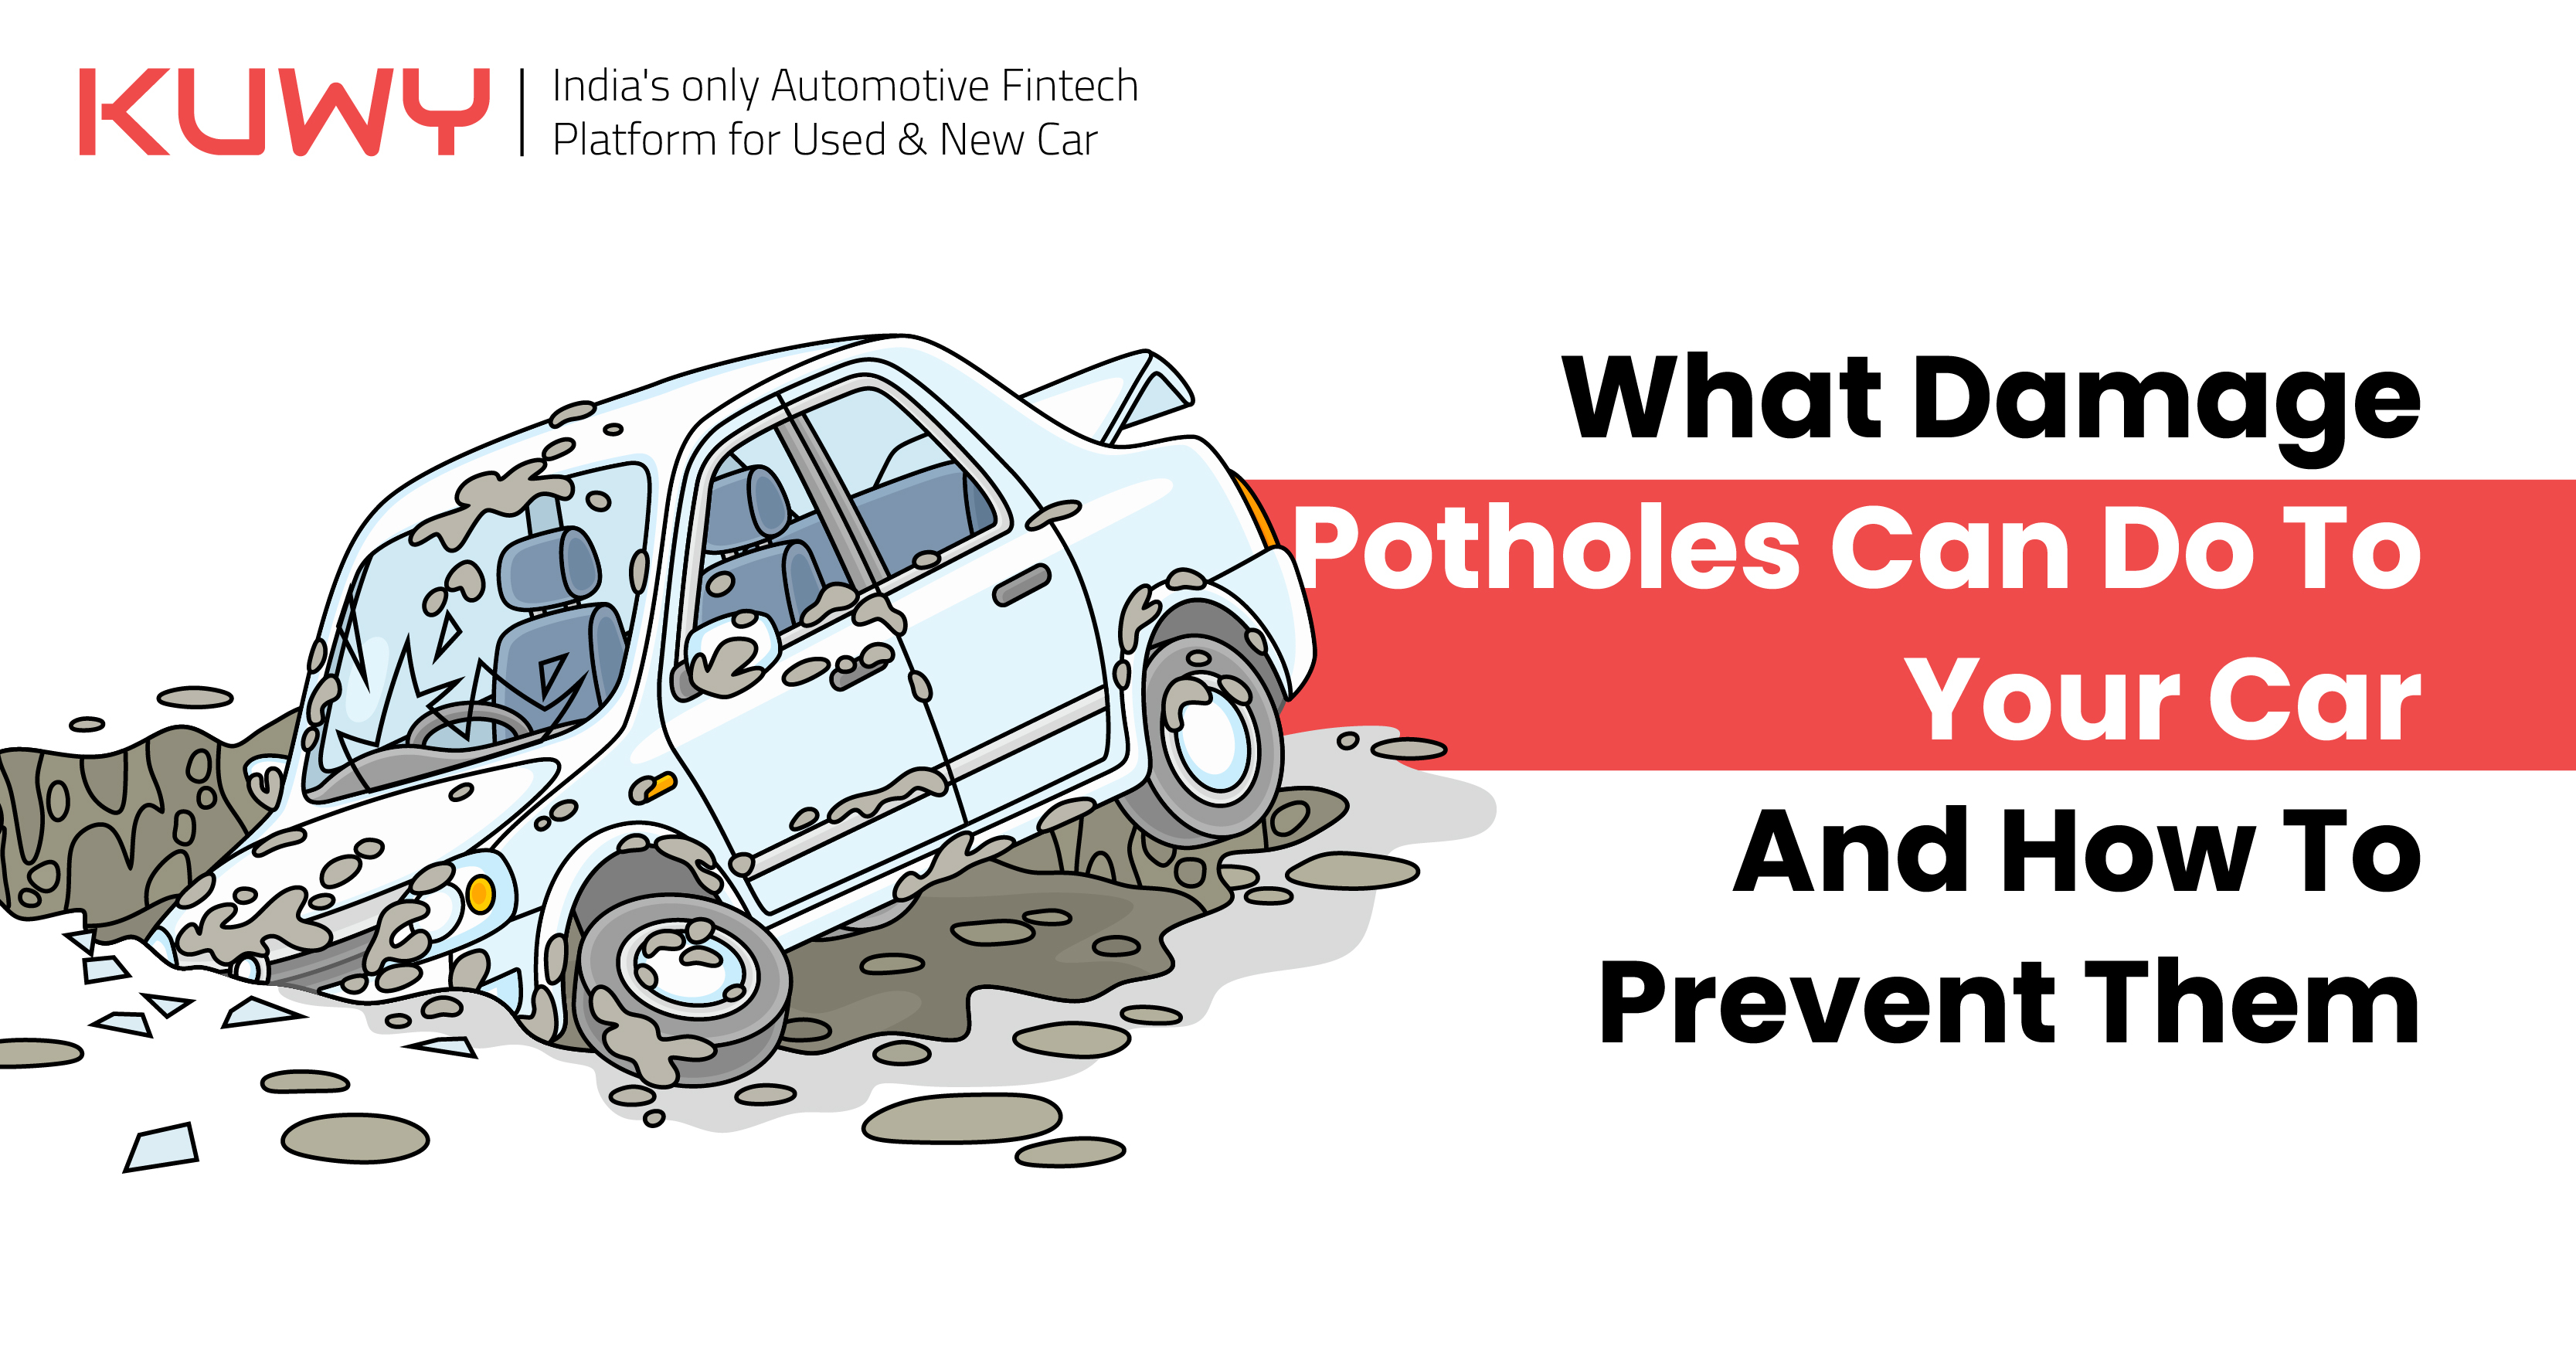 What Damage Potholes Can Do To Your Car And How To Prevent Them